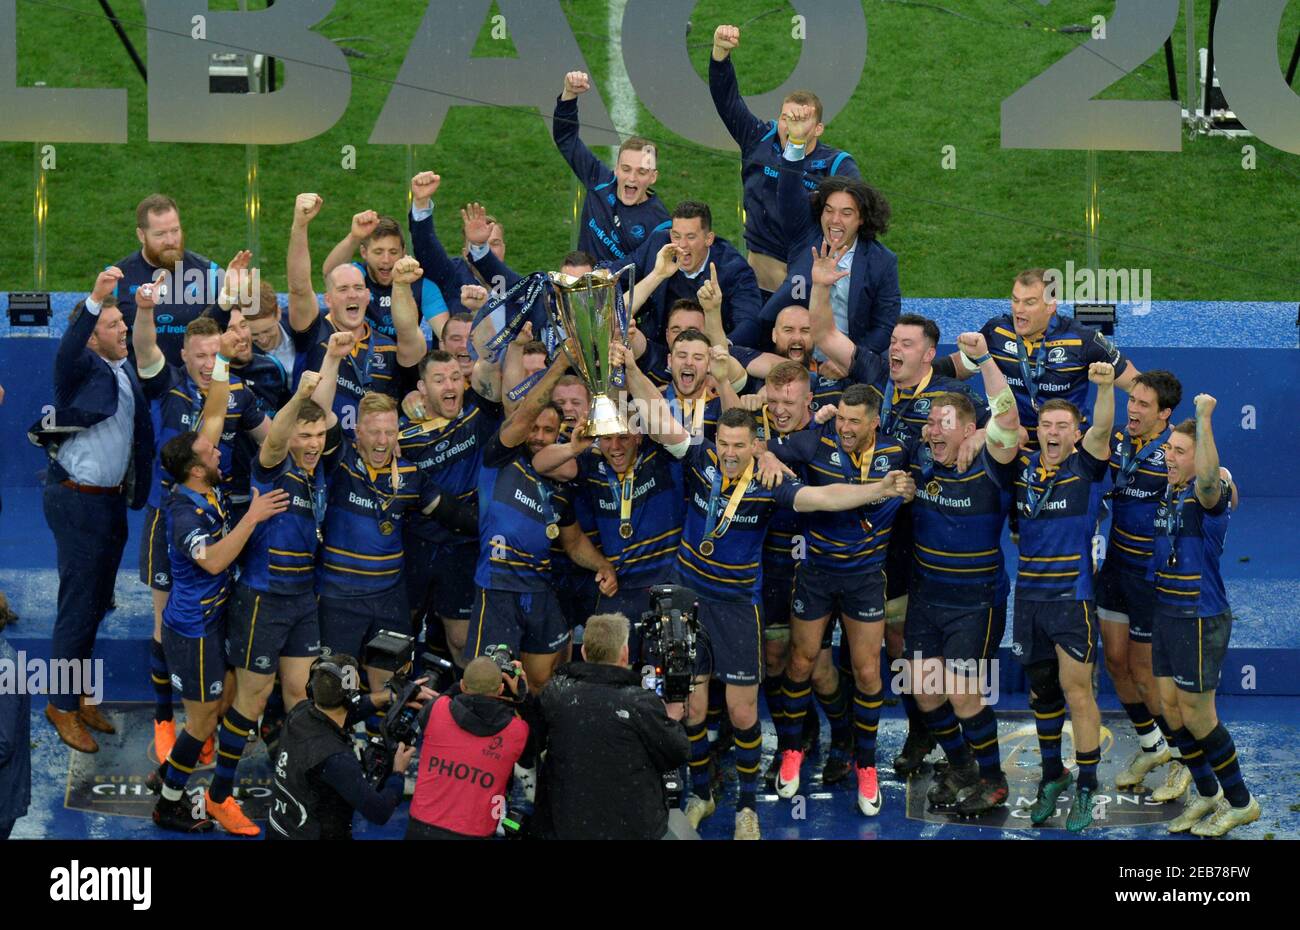 Rugby Union - European Champions Cup Final - Leinster Rugby v Racing 92 -  San Mames, Bilbao, Spain - May